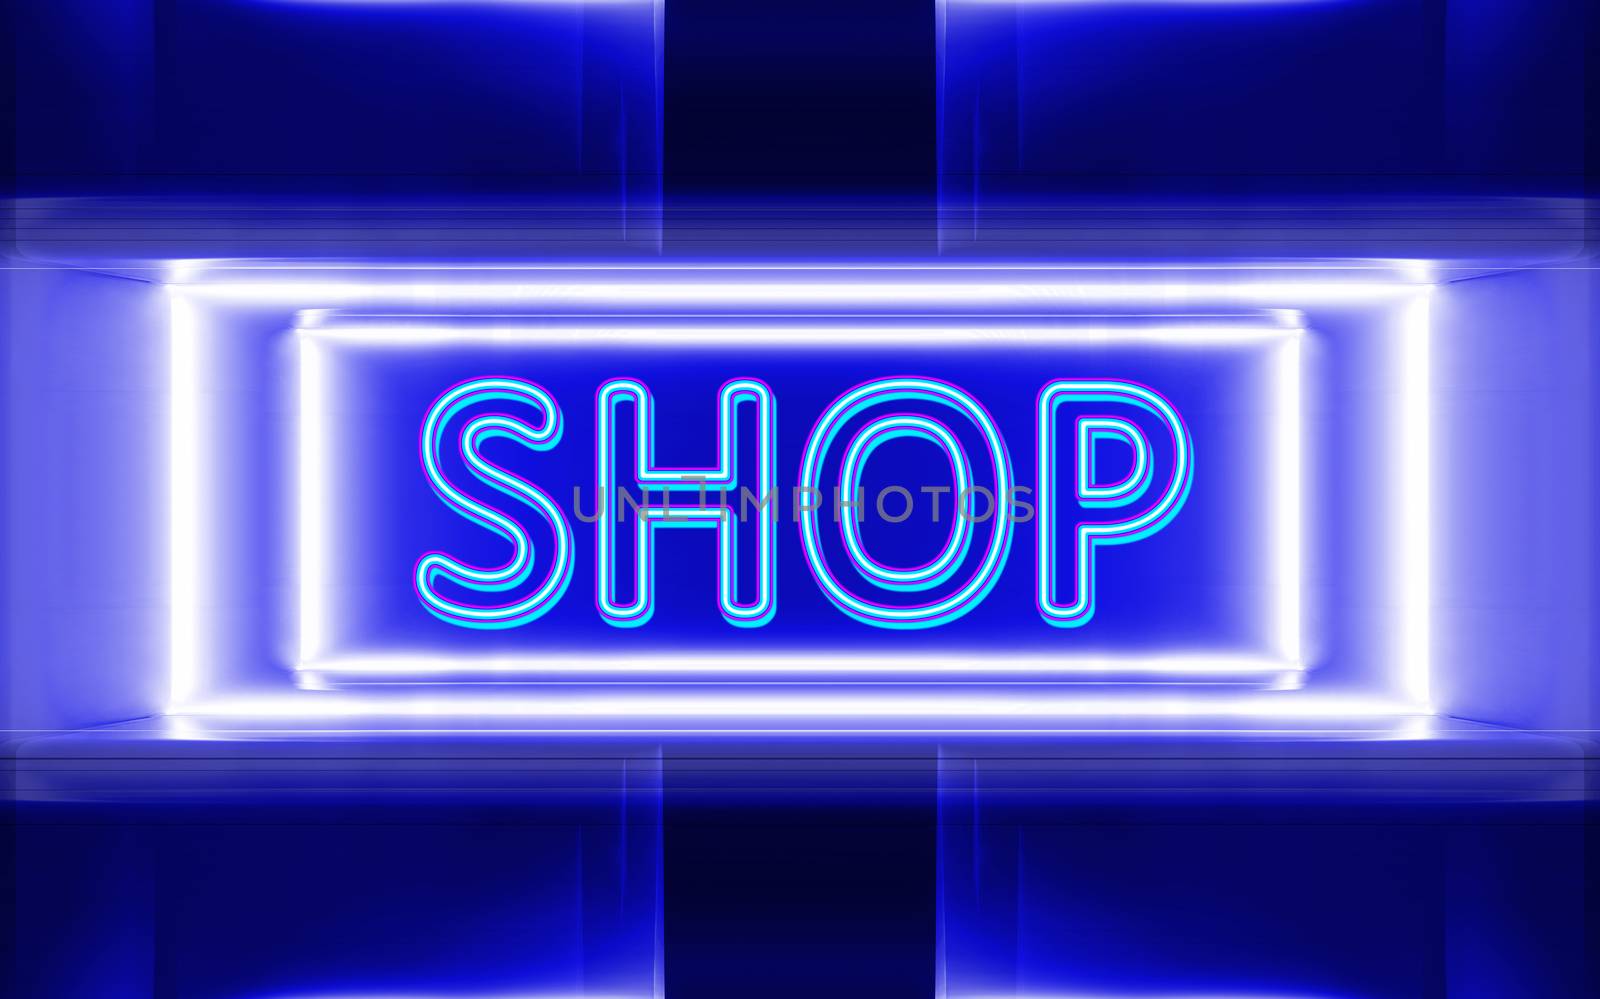 highly technological design of the neon sign of shop